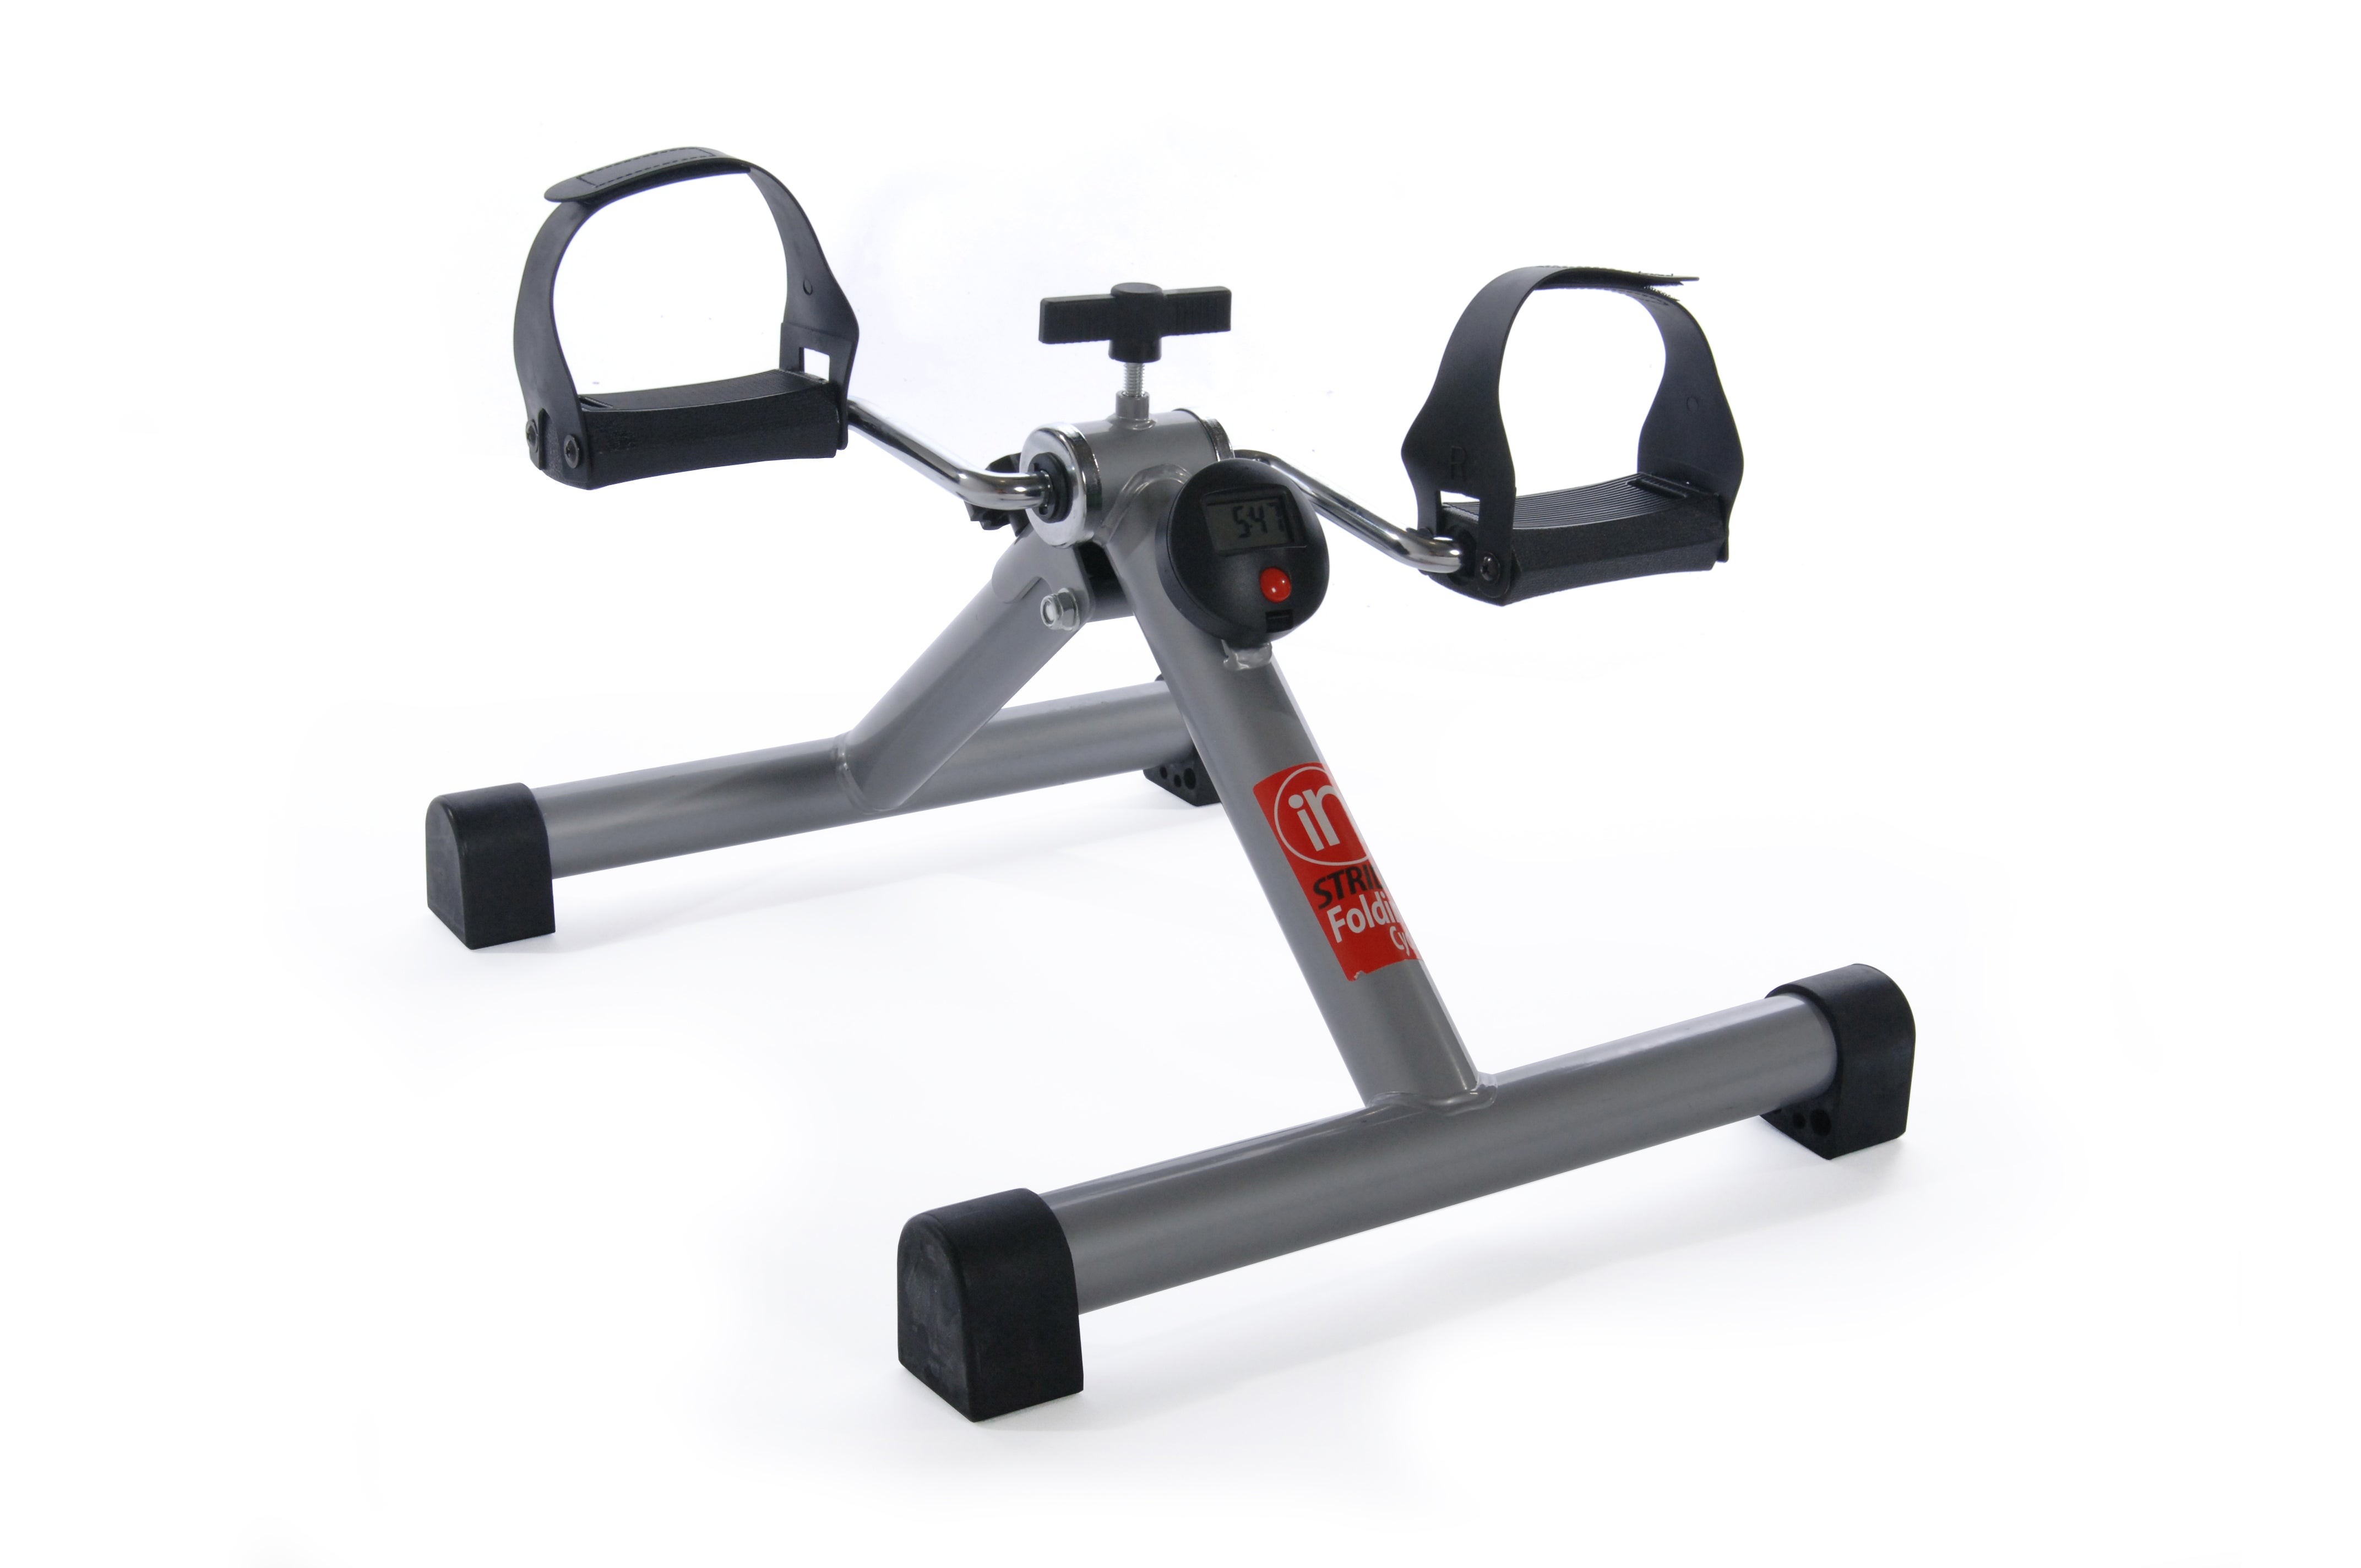 InStride Folding Cycle